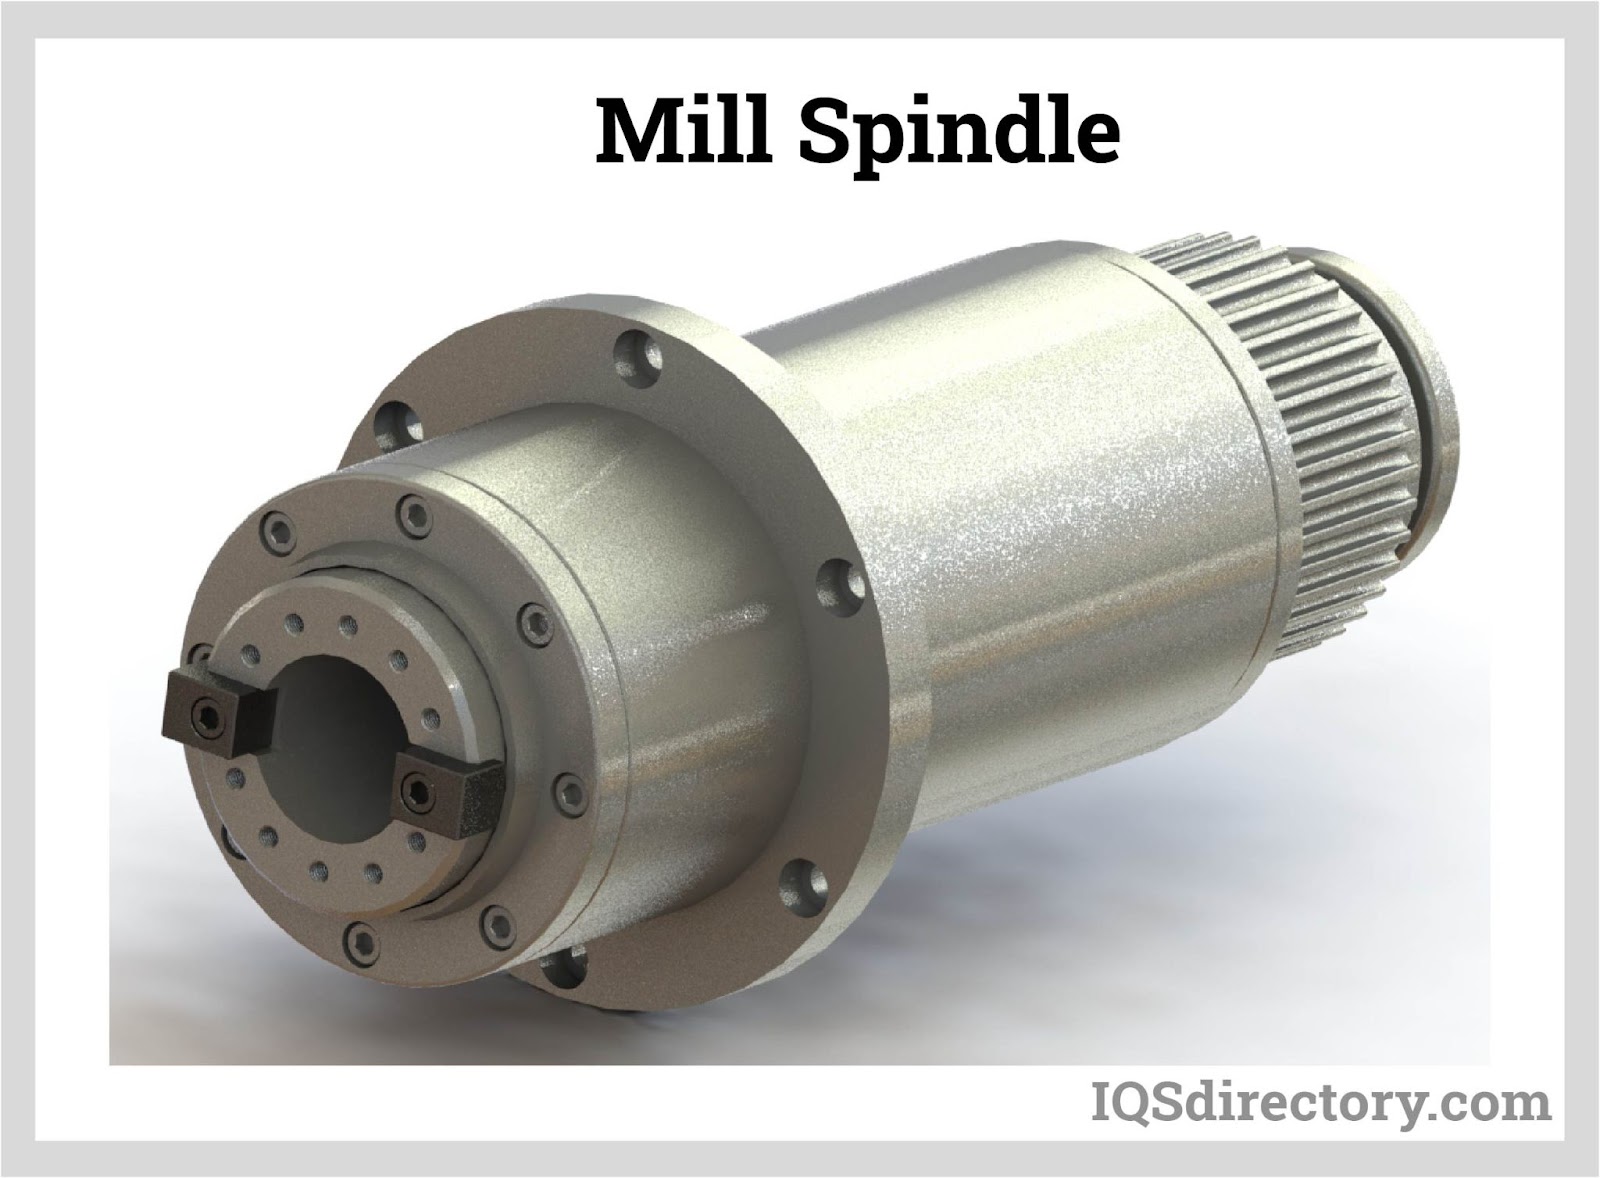 Mill Spindle